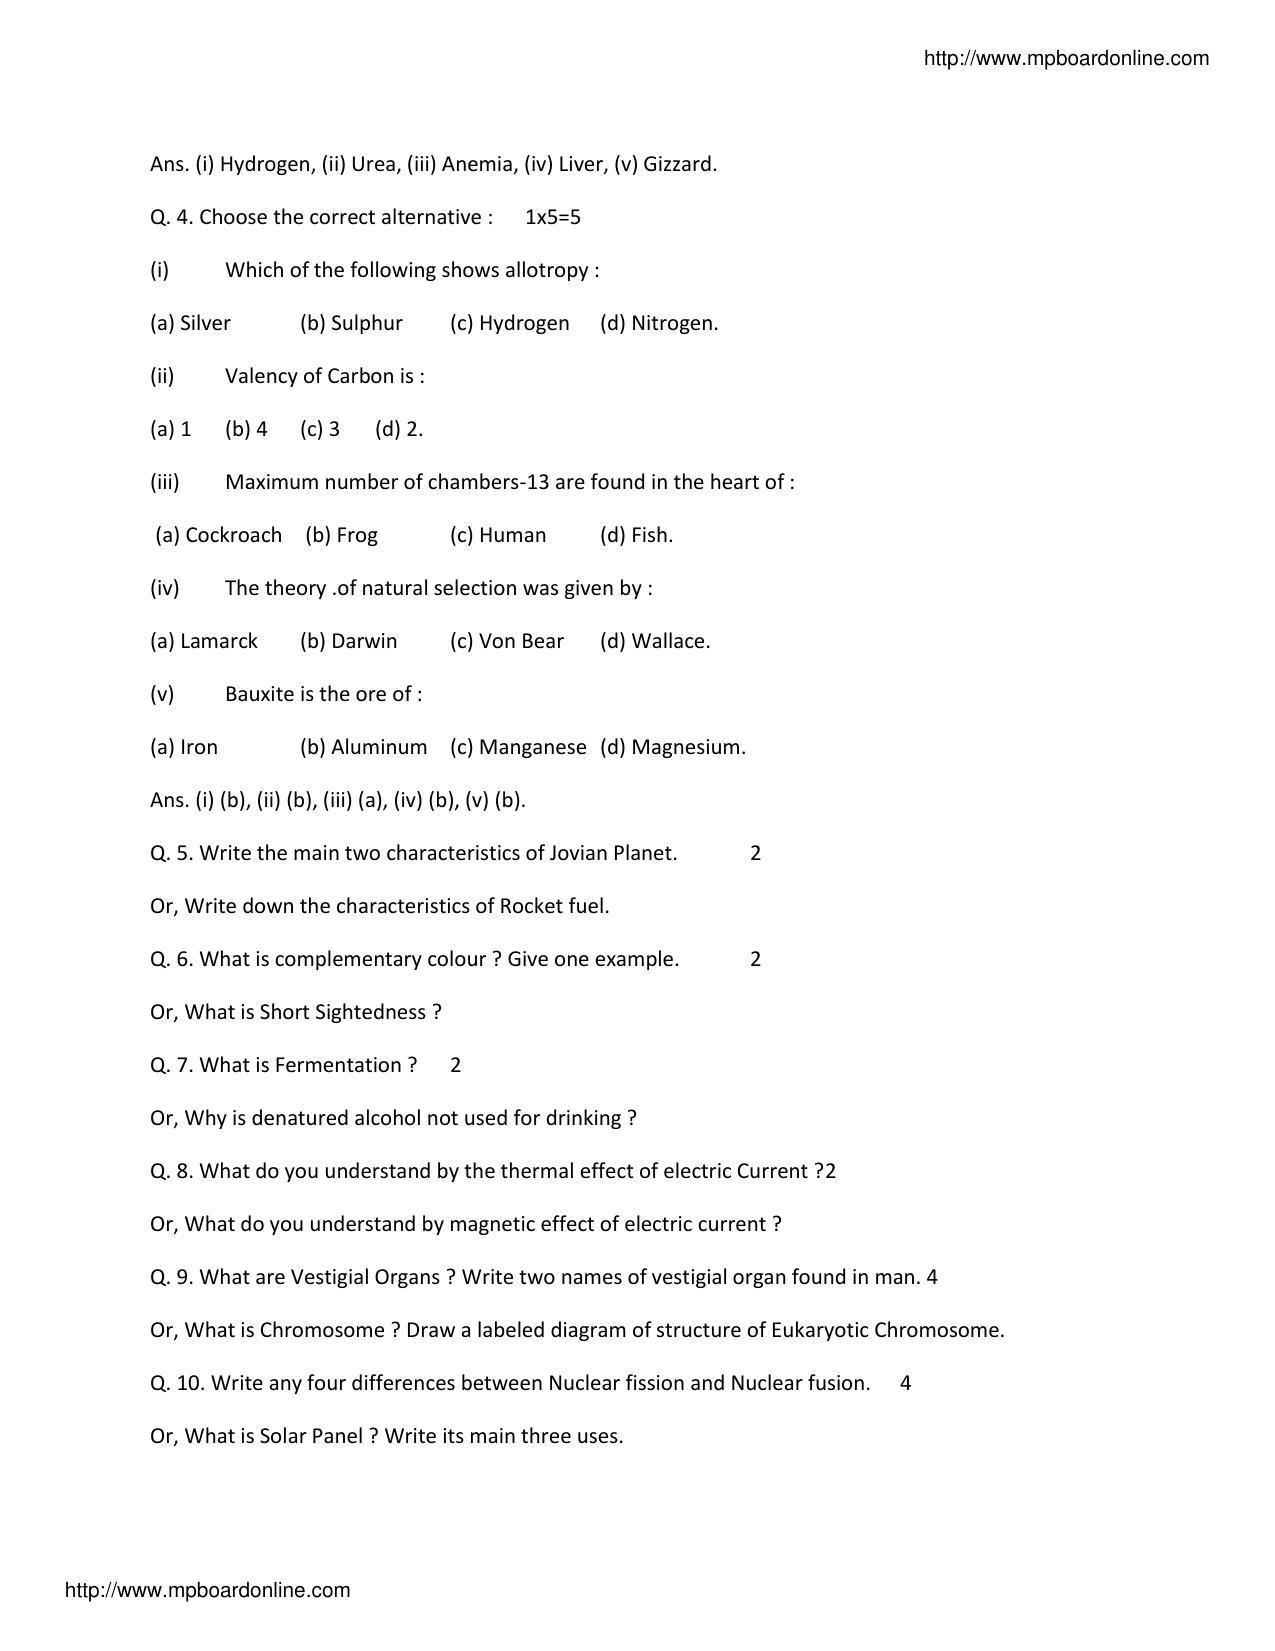 MP Board Class 10 Science (English Medium) 2014 Question Paper - Page 2